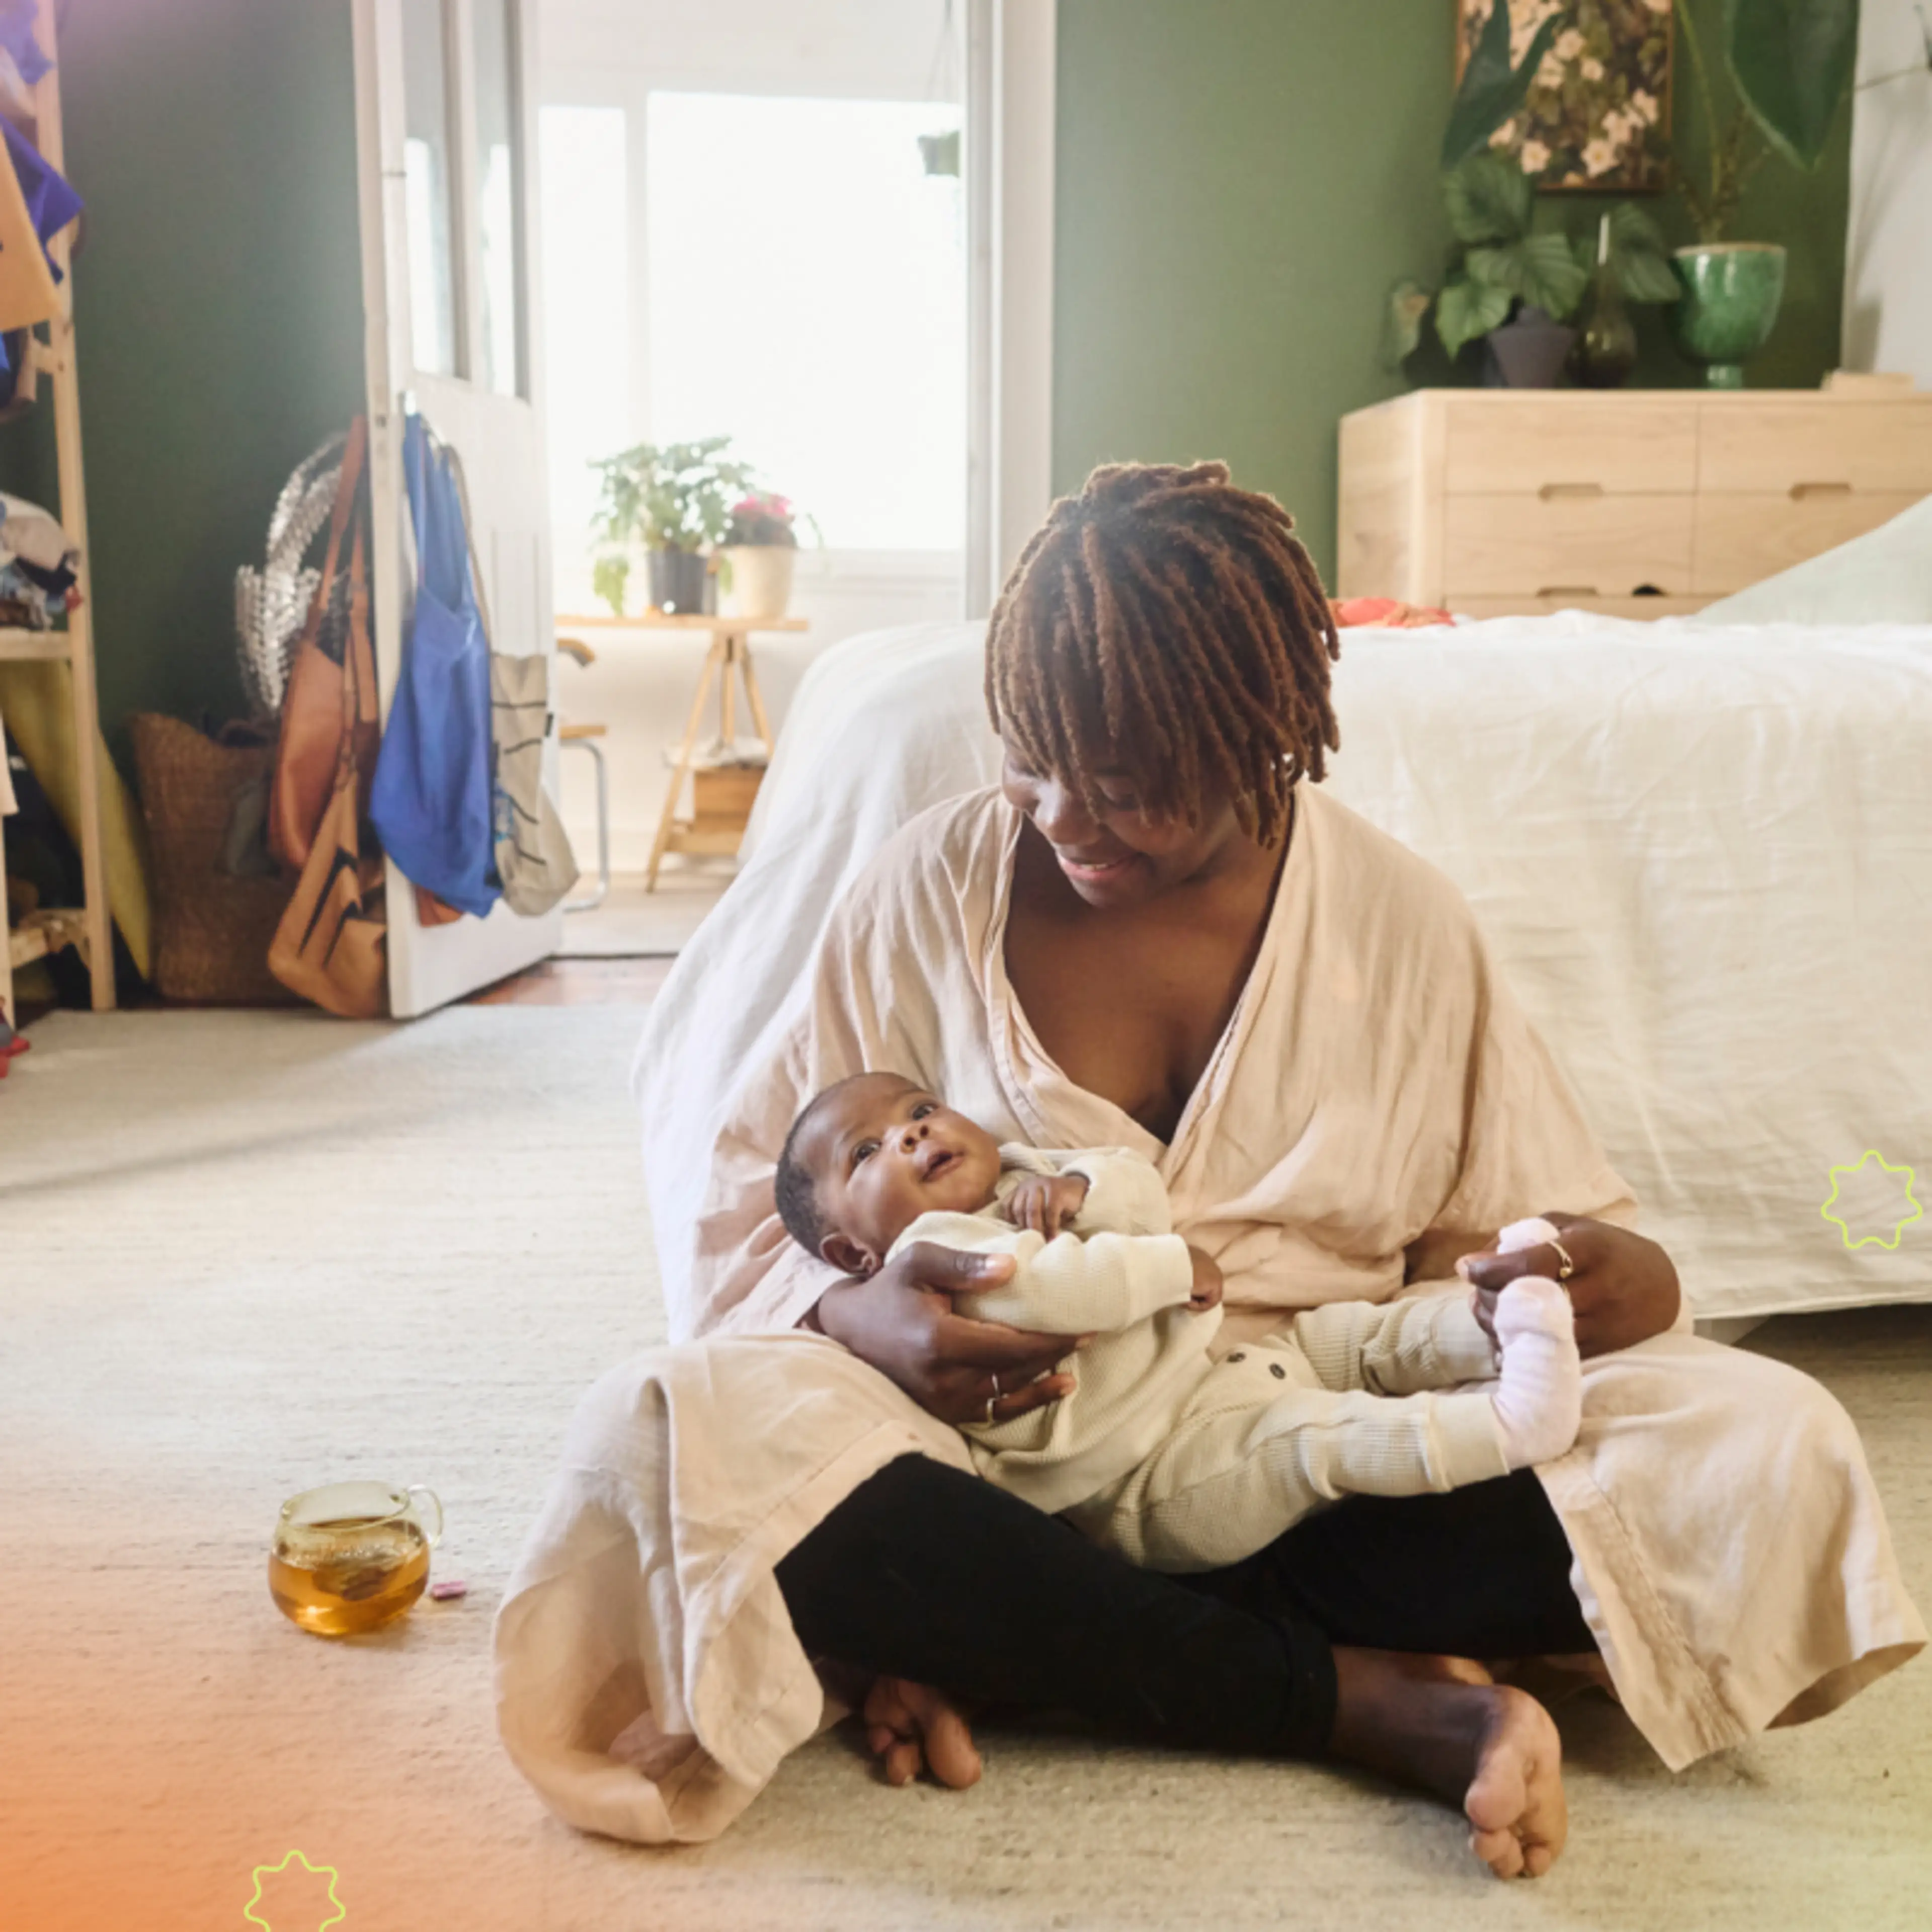 Does Motherhood Change You? It’s Complicated, According to These Women